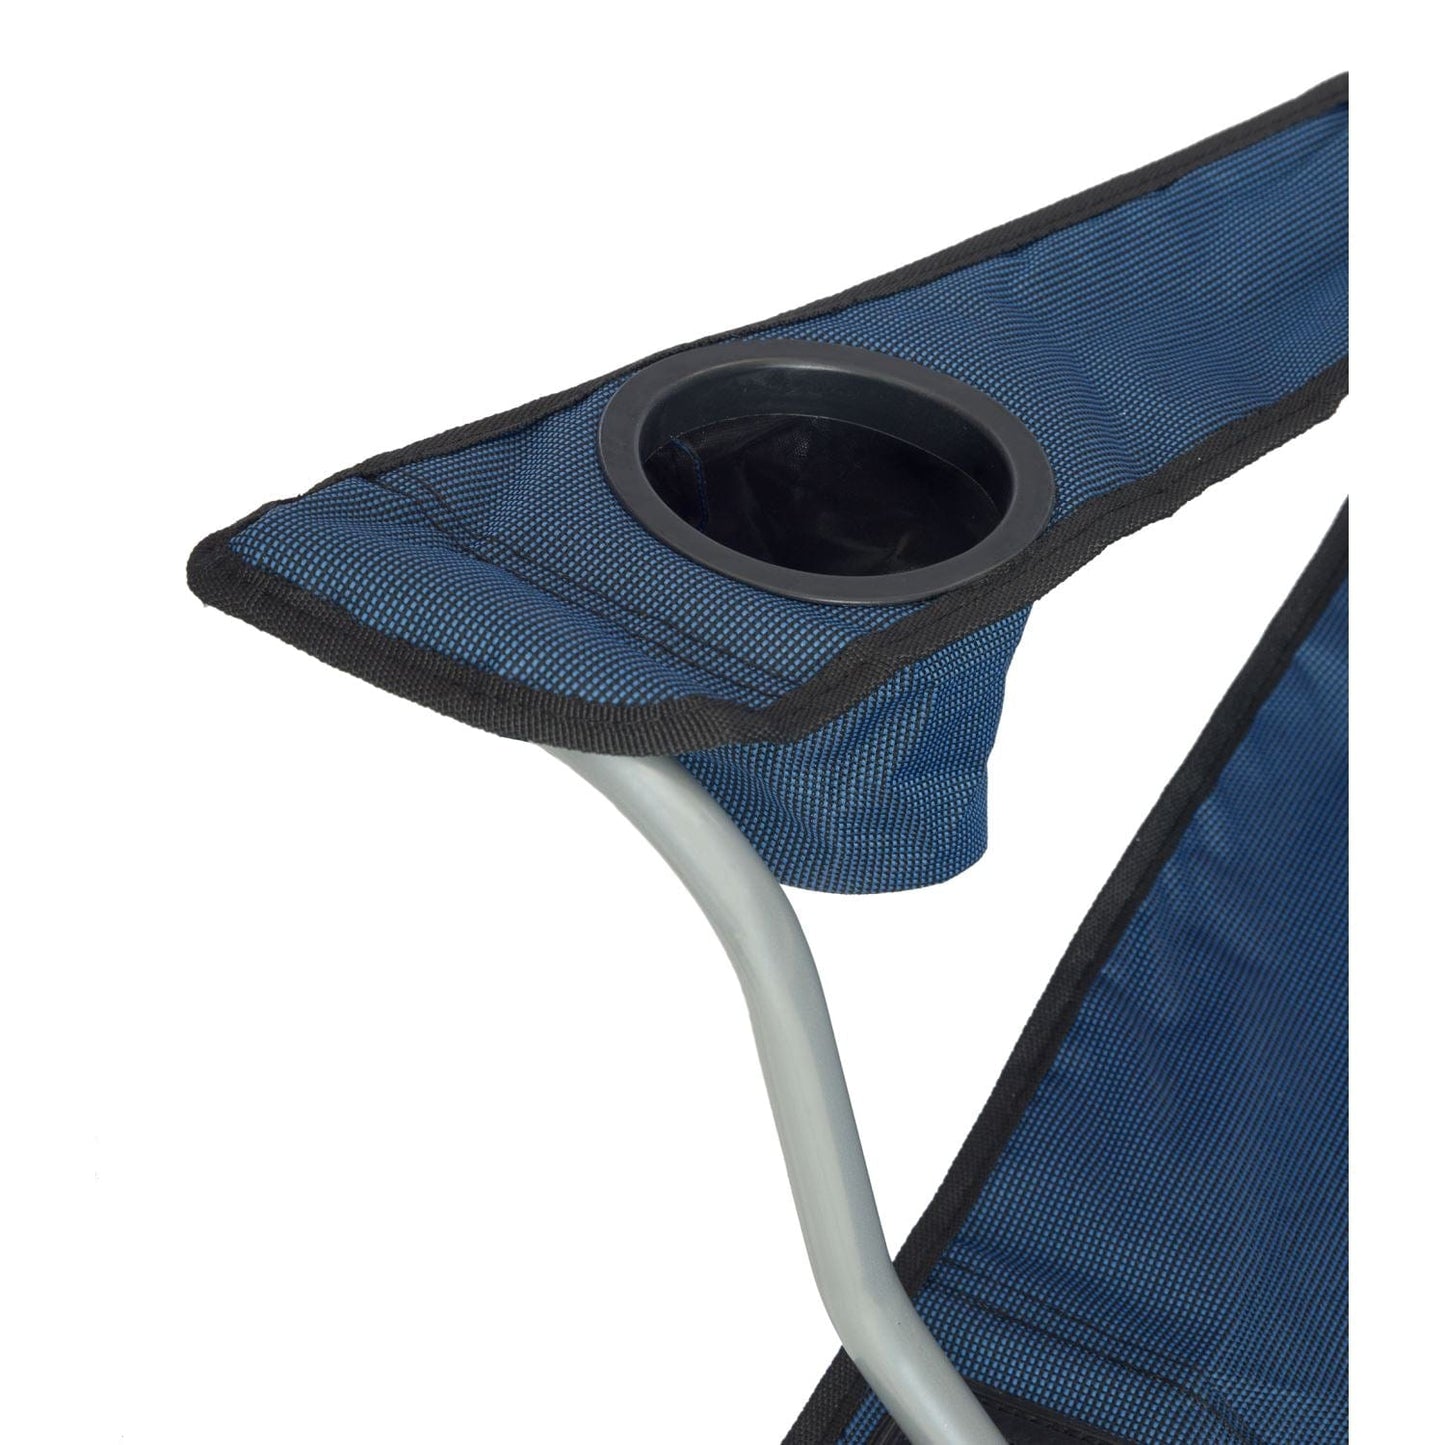 The Fulfiller Portable Chairs Quik Chair | Deluxe Folding Chair - Navy/Black 137622DS